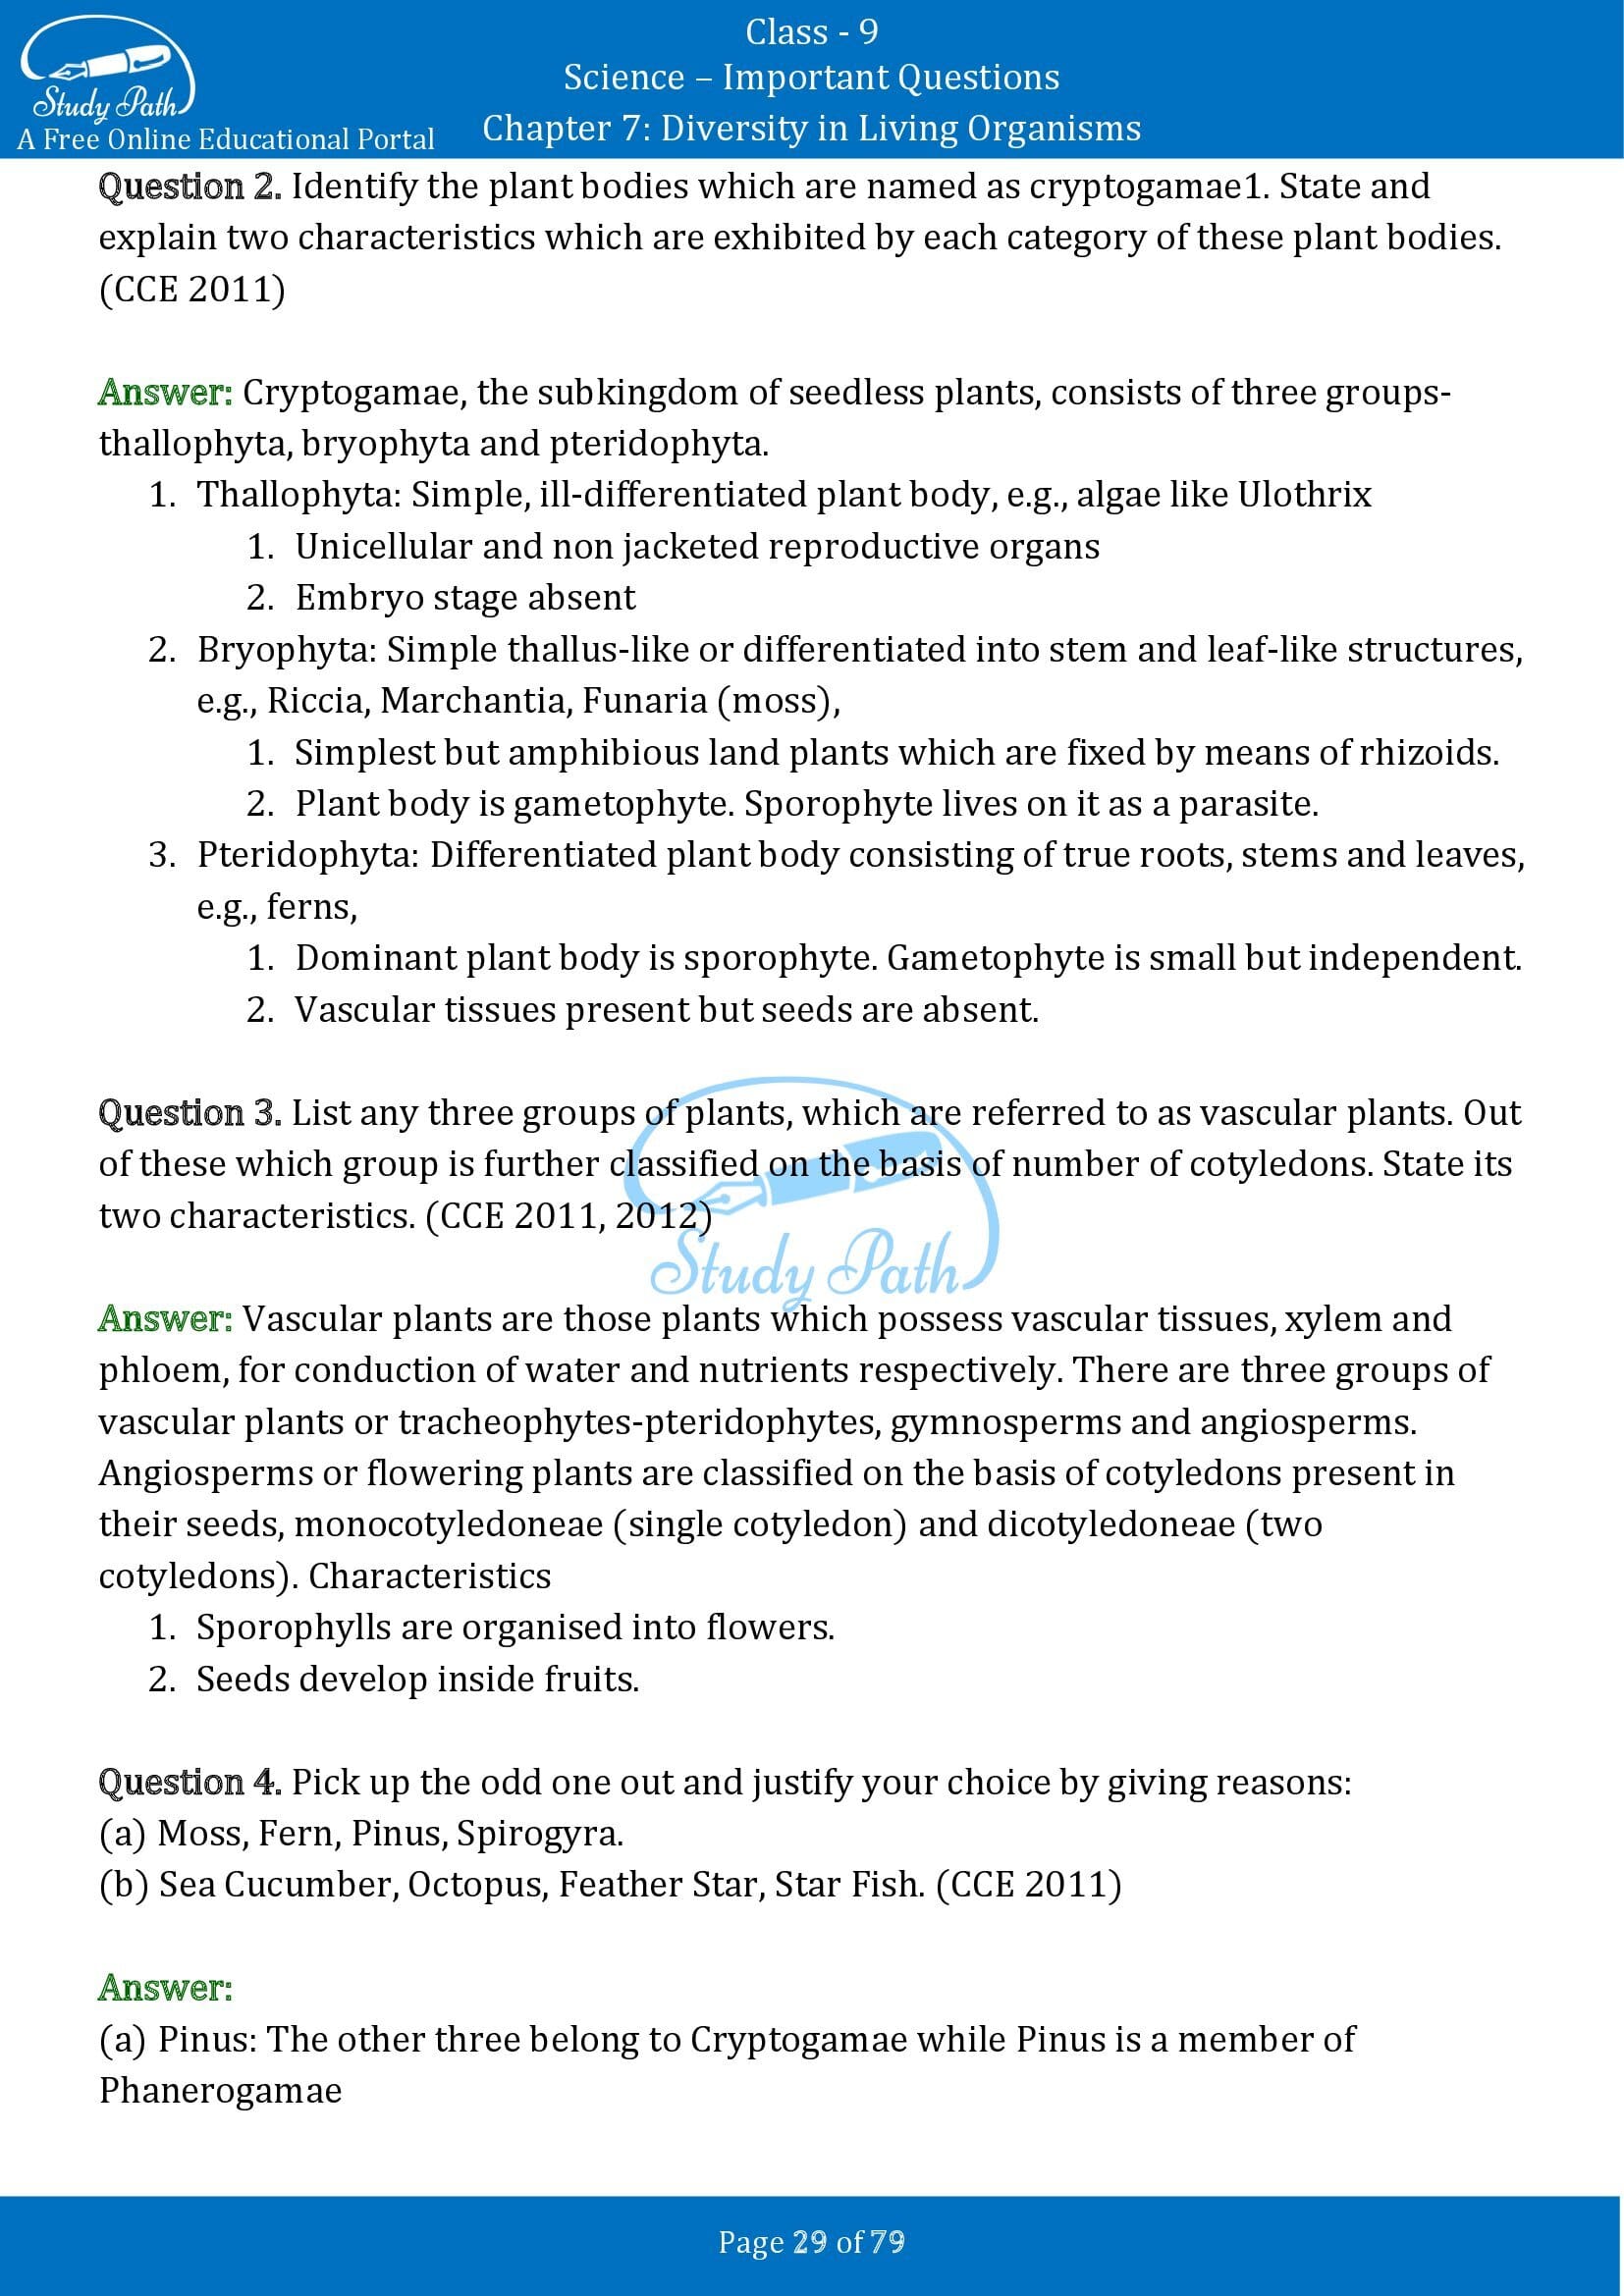 Important Questions for Class 9 Science Chapter 7 Diversity in Living Organisms 00029